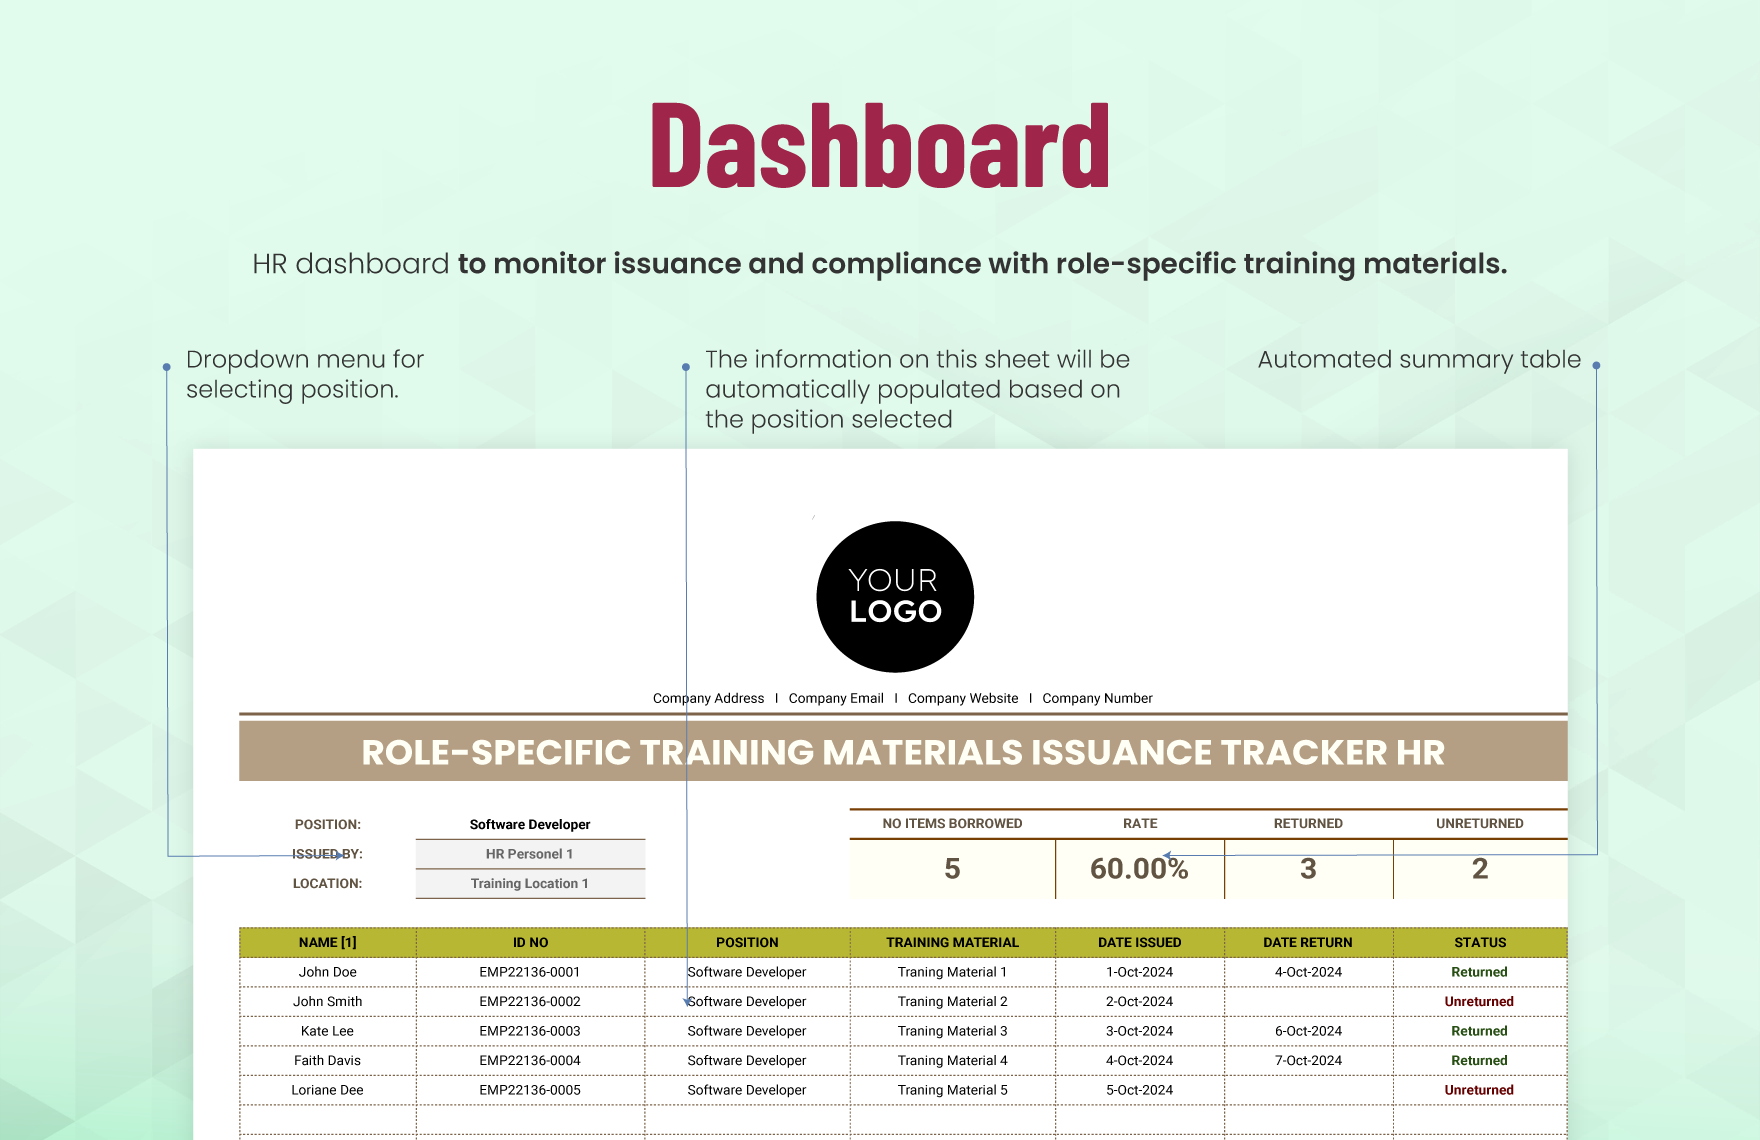 Role-specific Training Materials Issuance Tracker HR Template